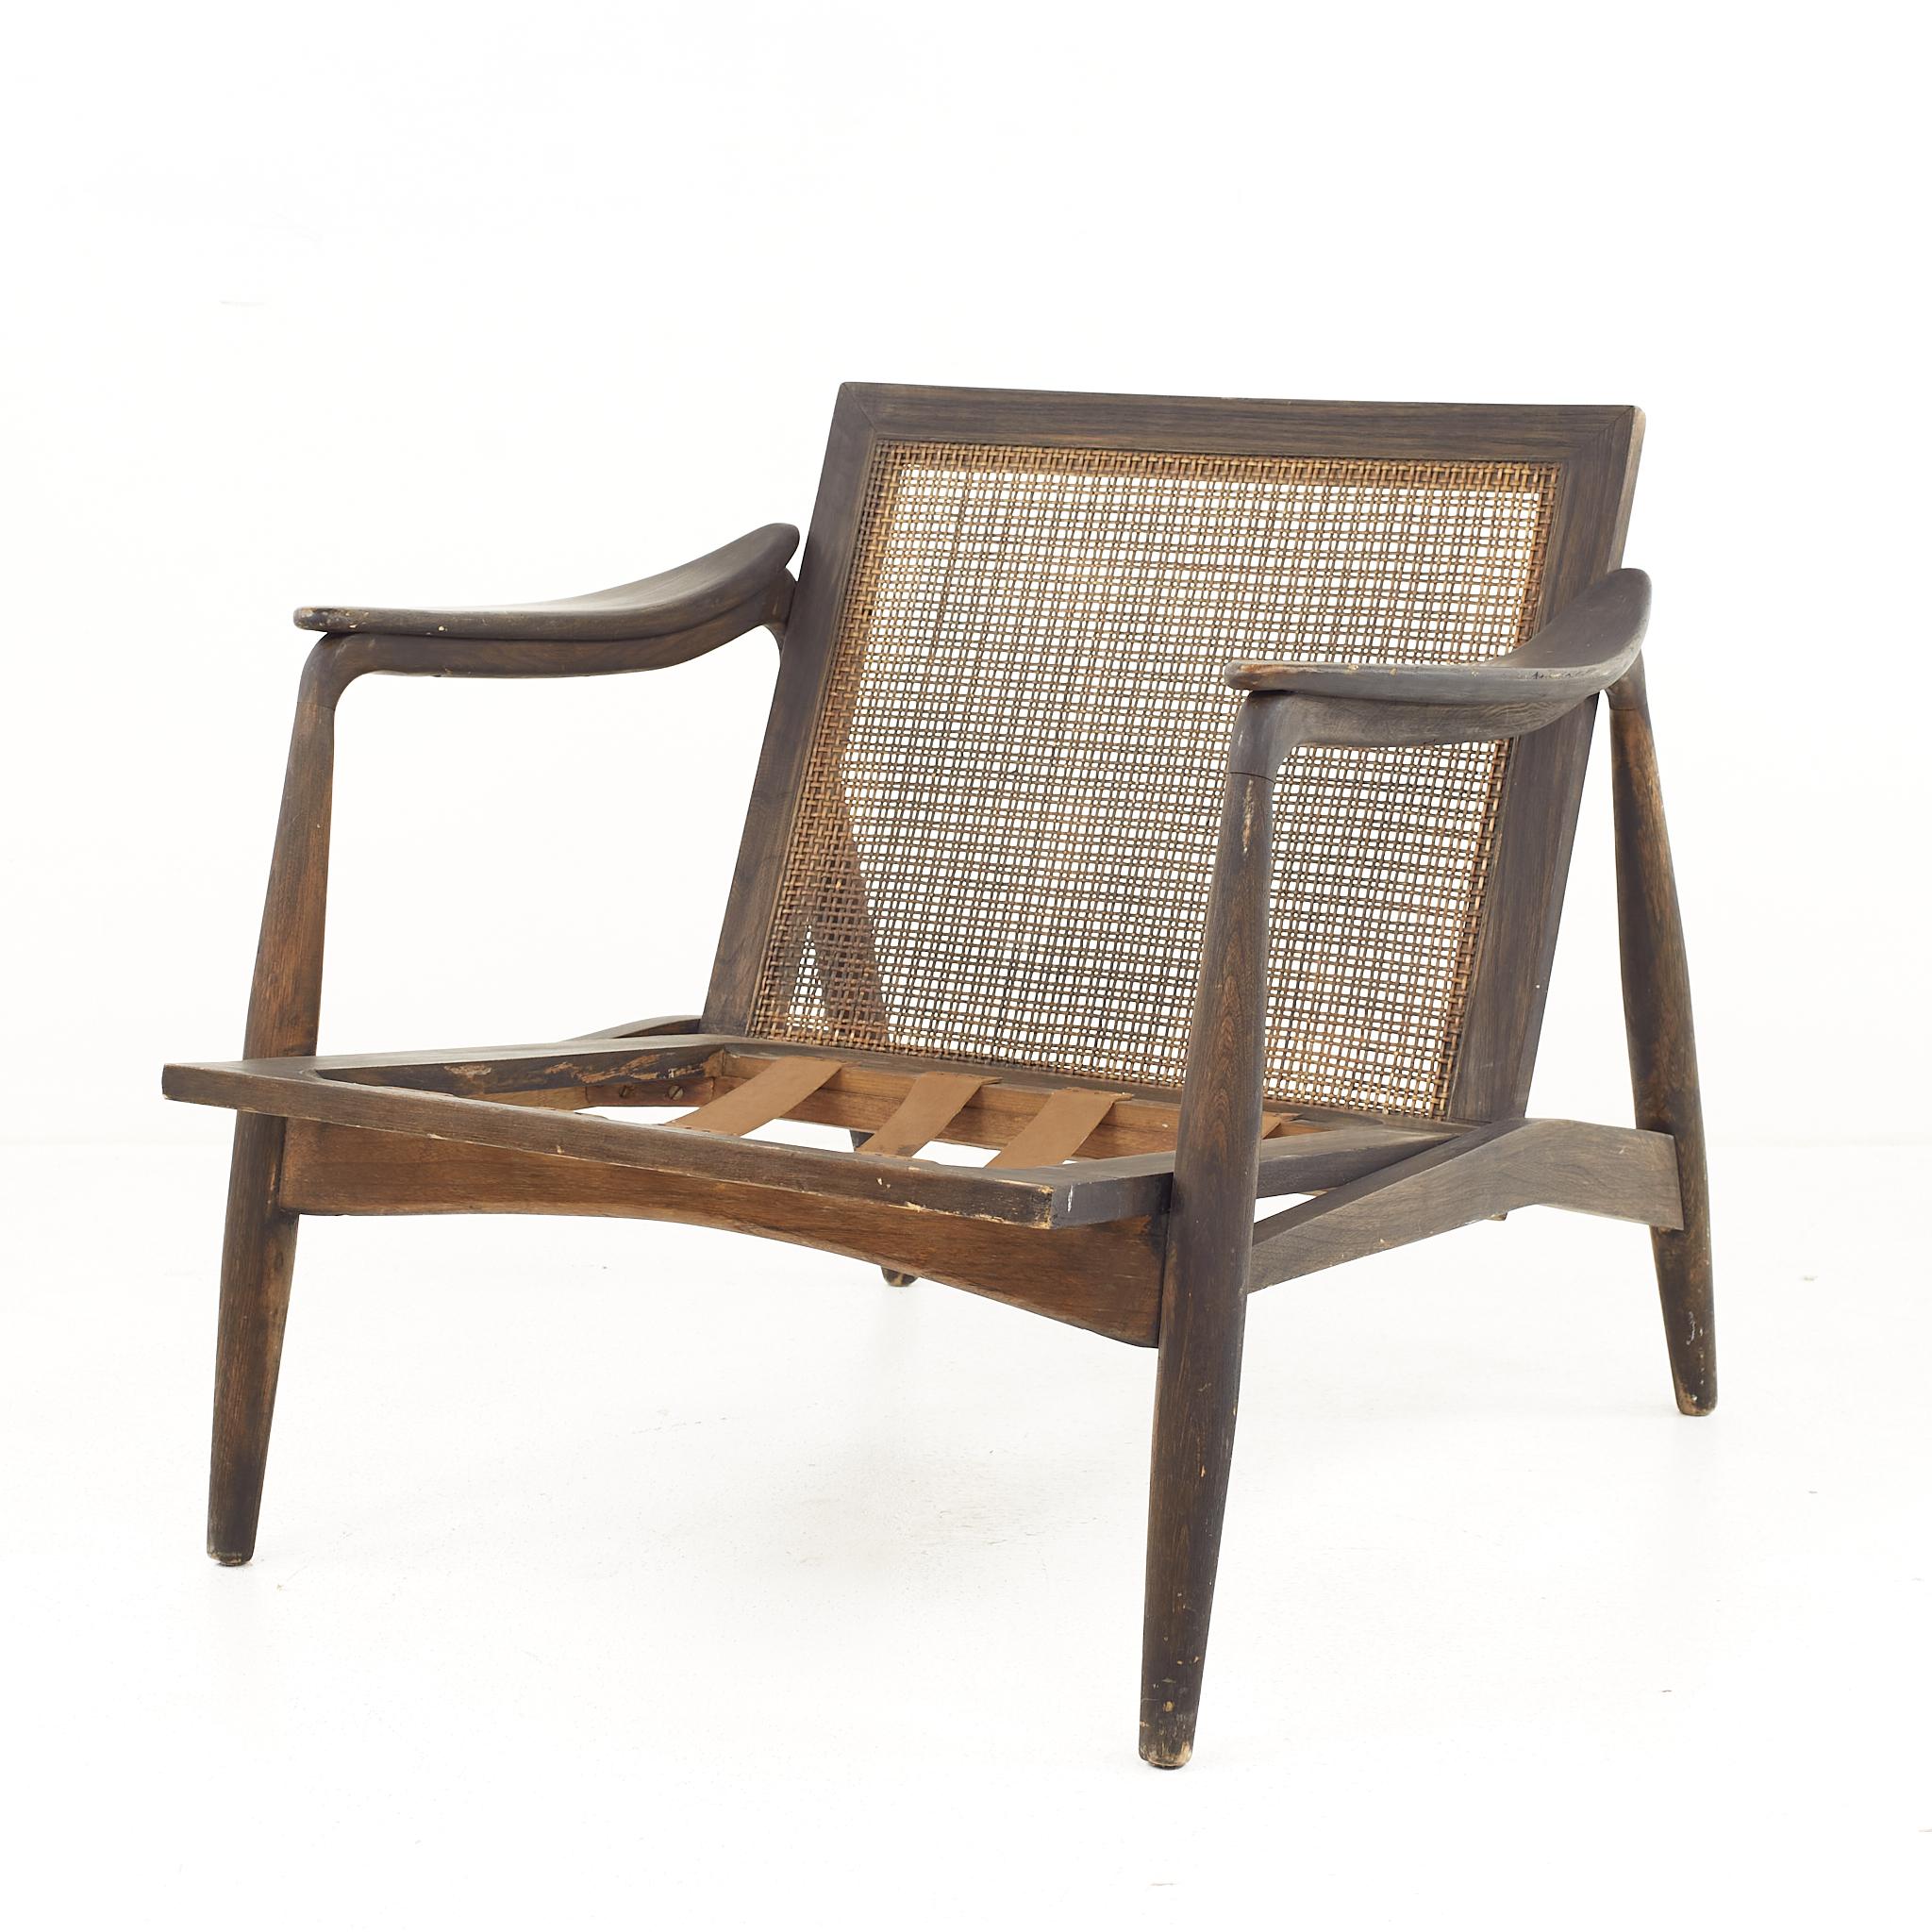 Lawrence Peabody R Nemschoff MCM Ebonized Walnut Cane Lounge Chairs, Pair In Good Condition For Sale In Countryside, IL